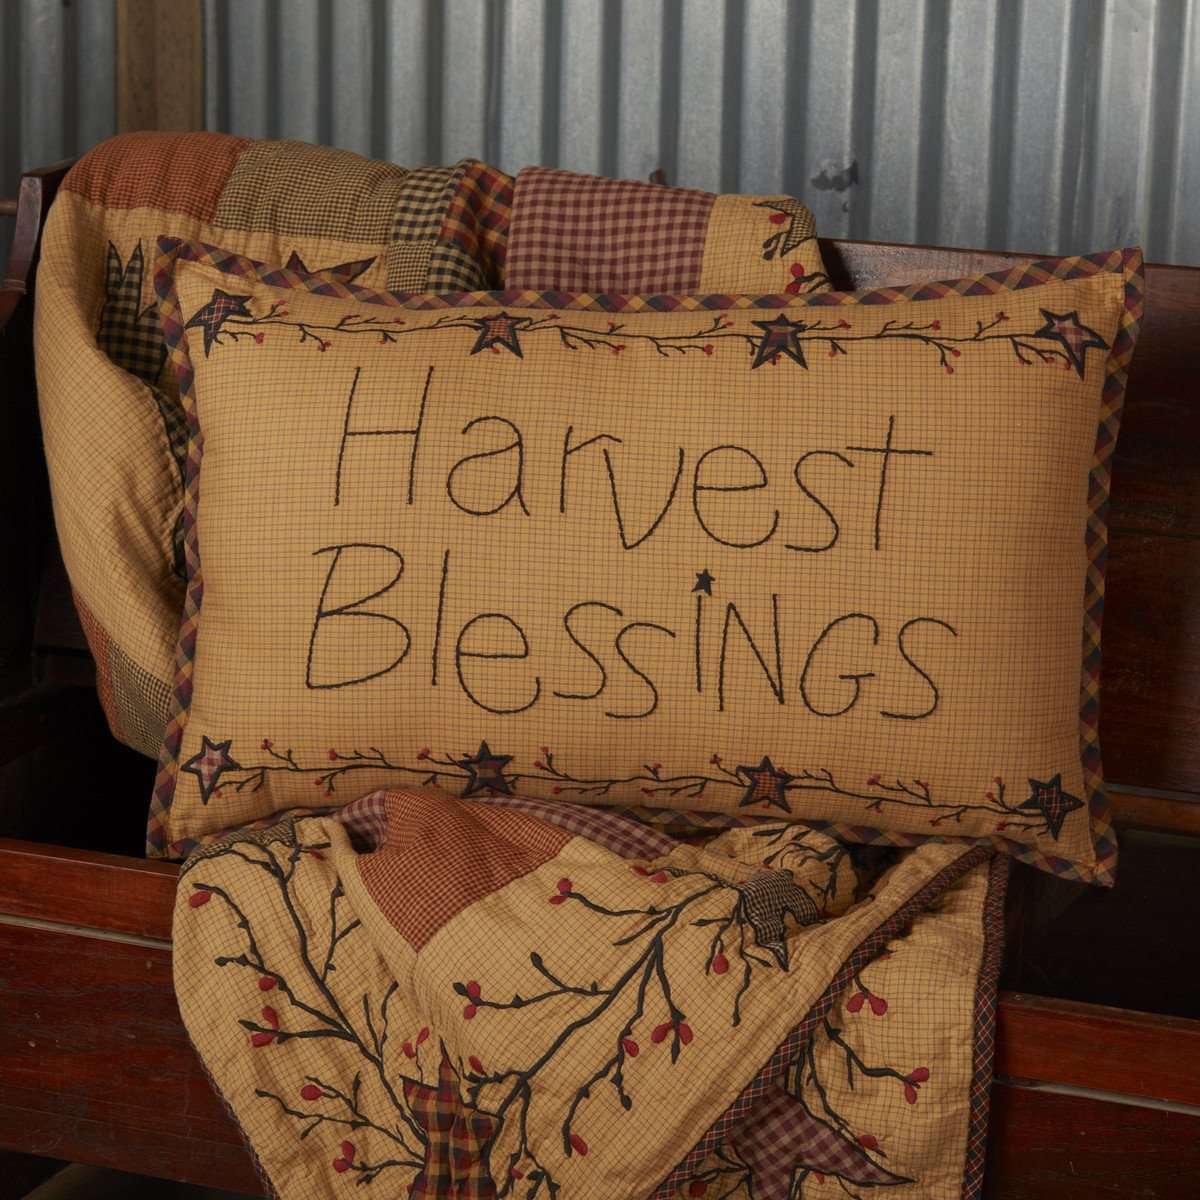 HERITAGE FARMS HARVEST BLESSINGS PILLOW 14X22